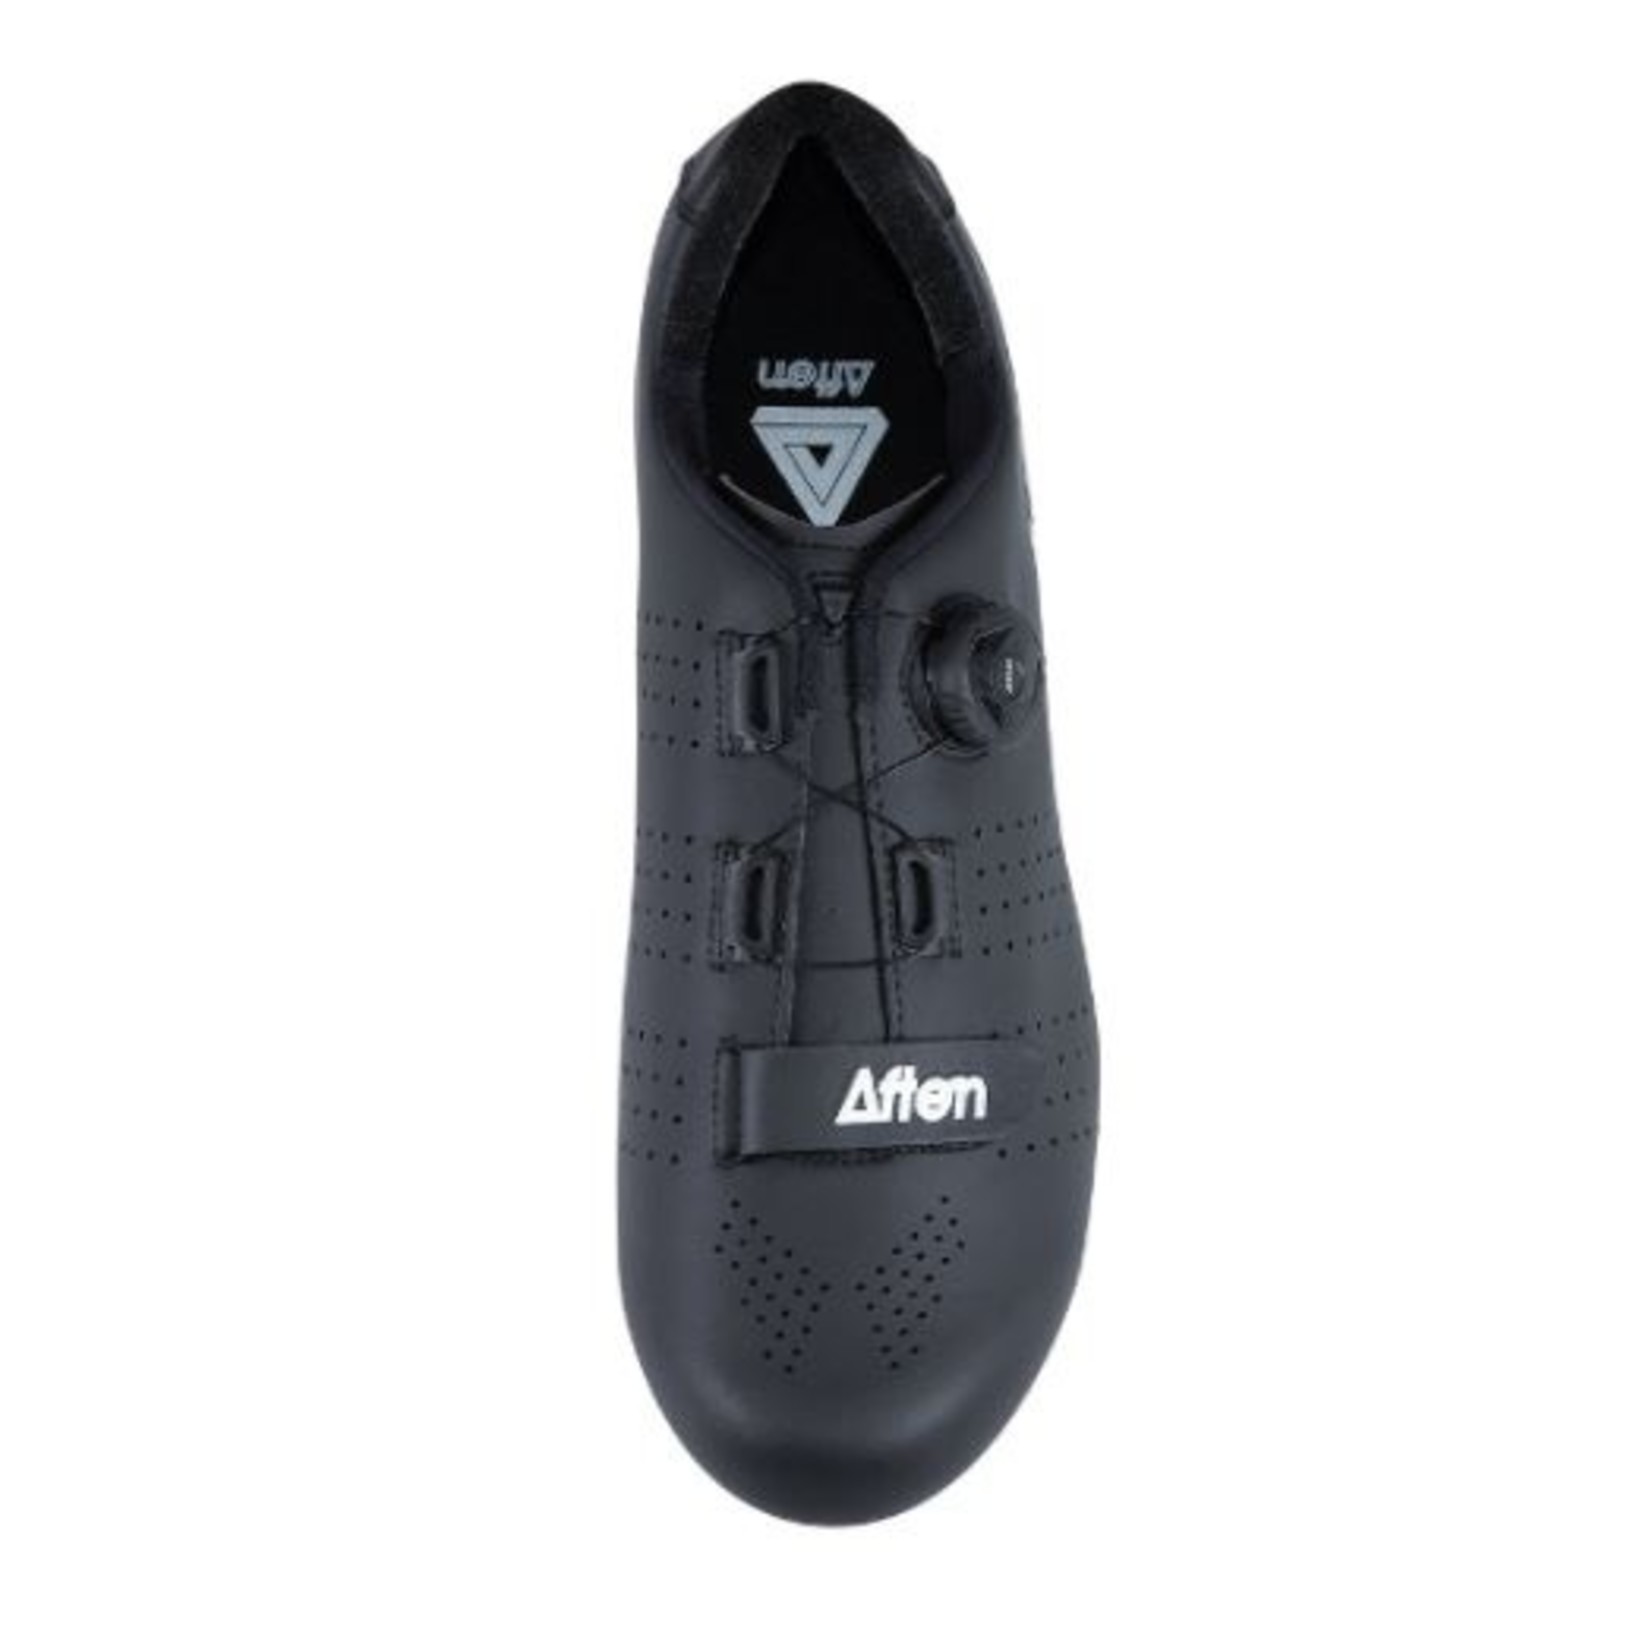 Afton Road Gravel Cycling Shoes - Royce  Leather- Black/White